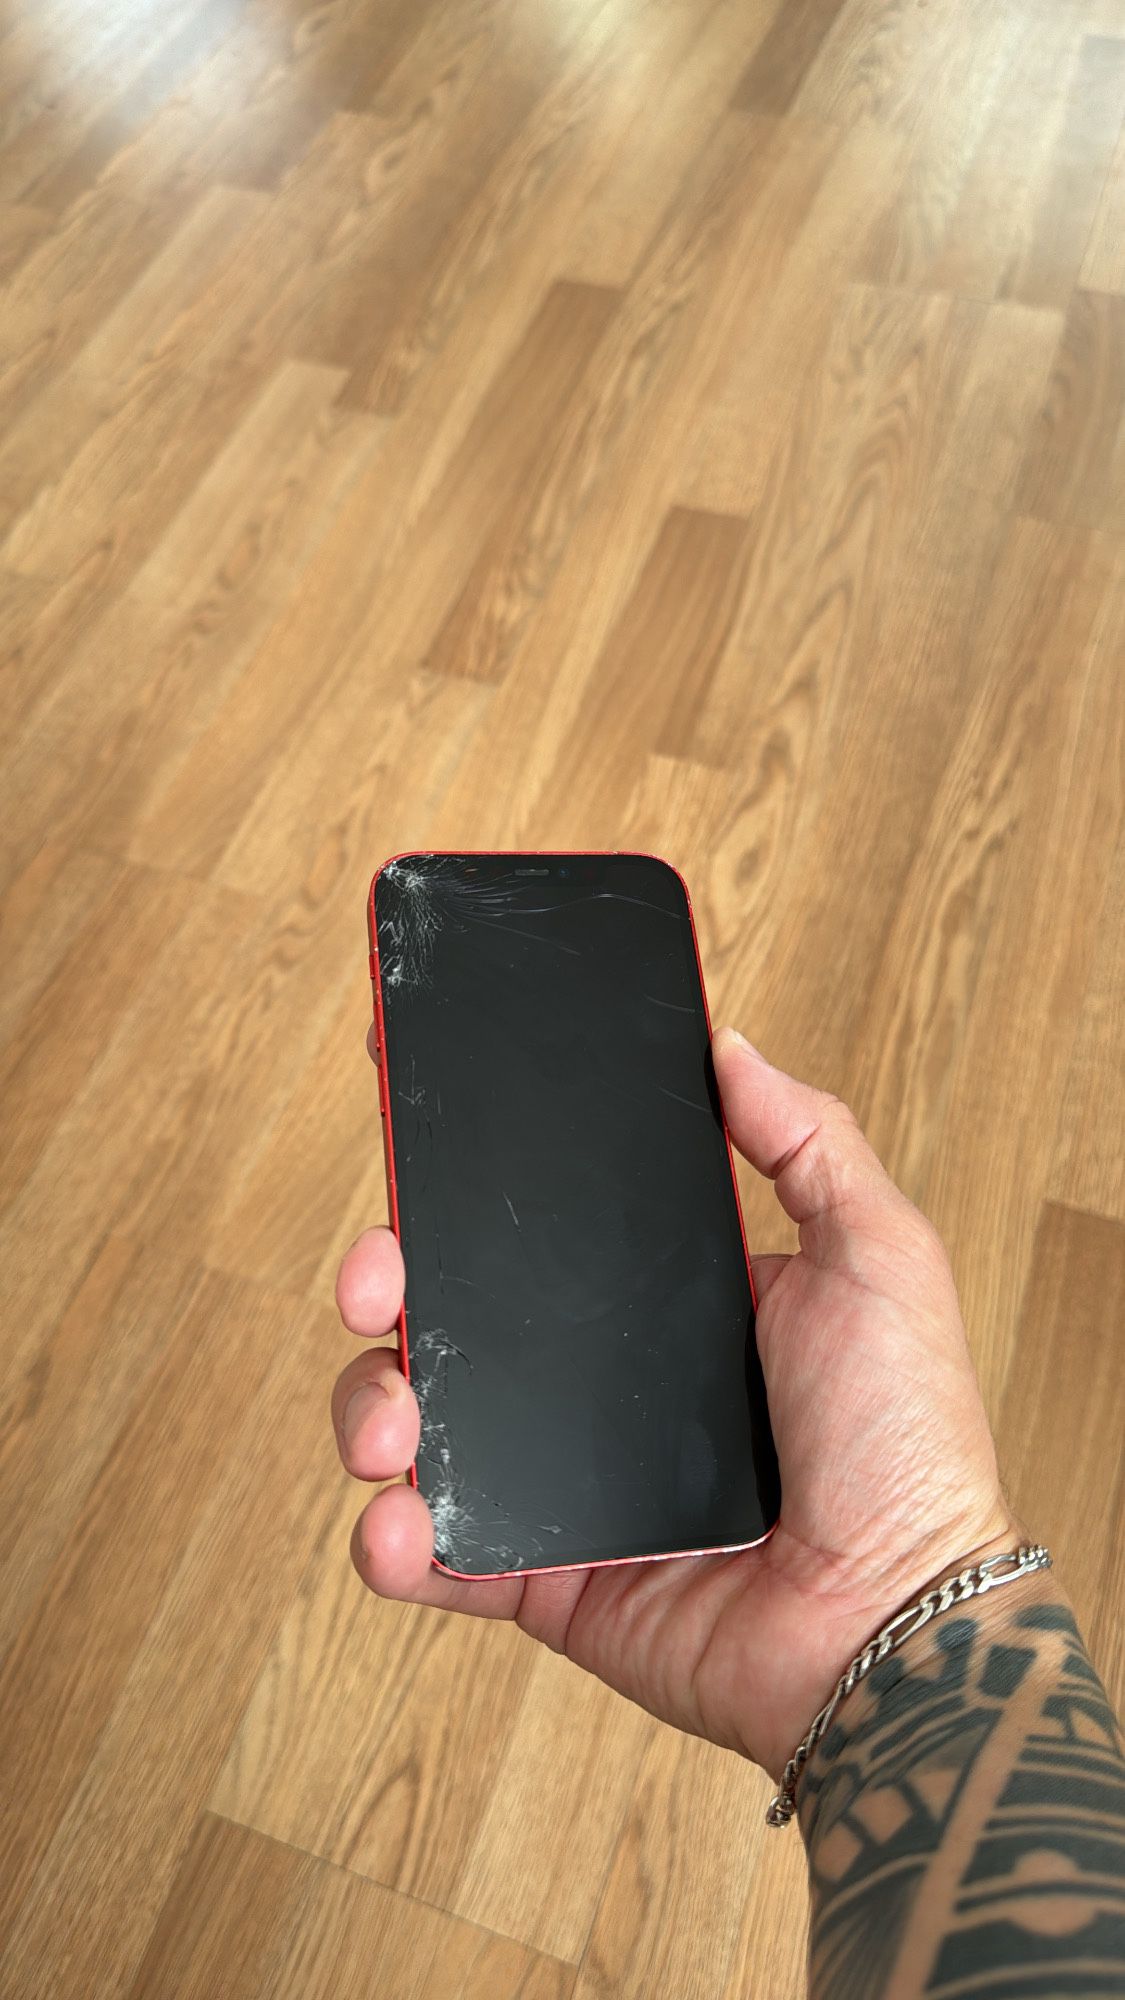 Iphone XR Repair Delivery Service $55